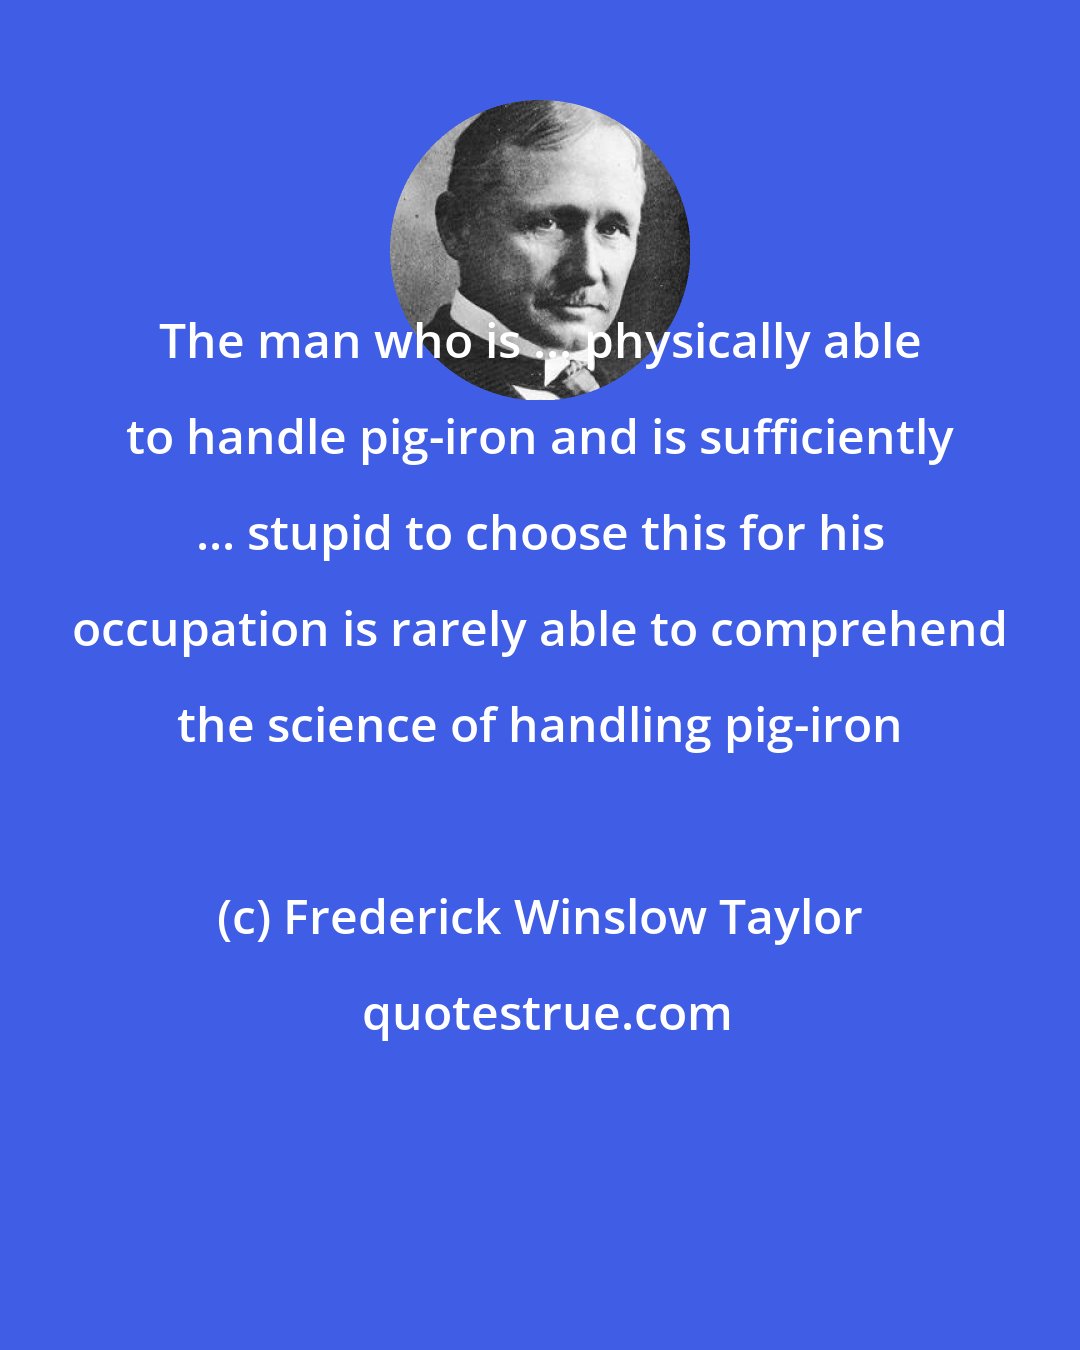 Frederick Winslow Taylor: The man who is ... physically able to handle pig-iron and is sufficiently ... stupid to choose this for his occupation is rarely able to comprehend the science of handling pig-iron